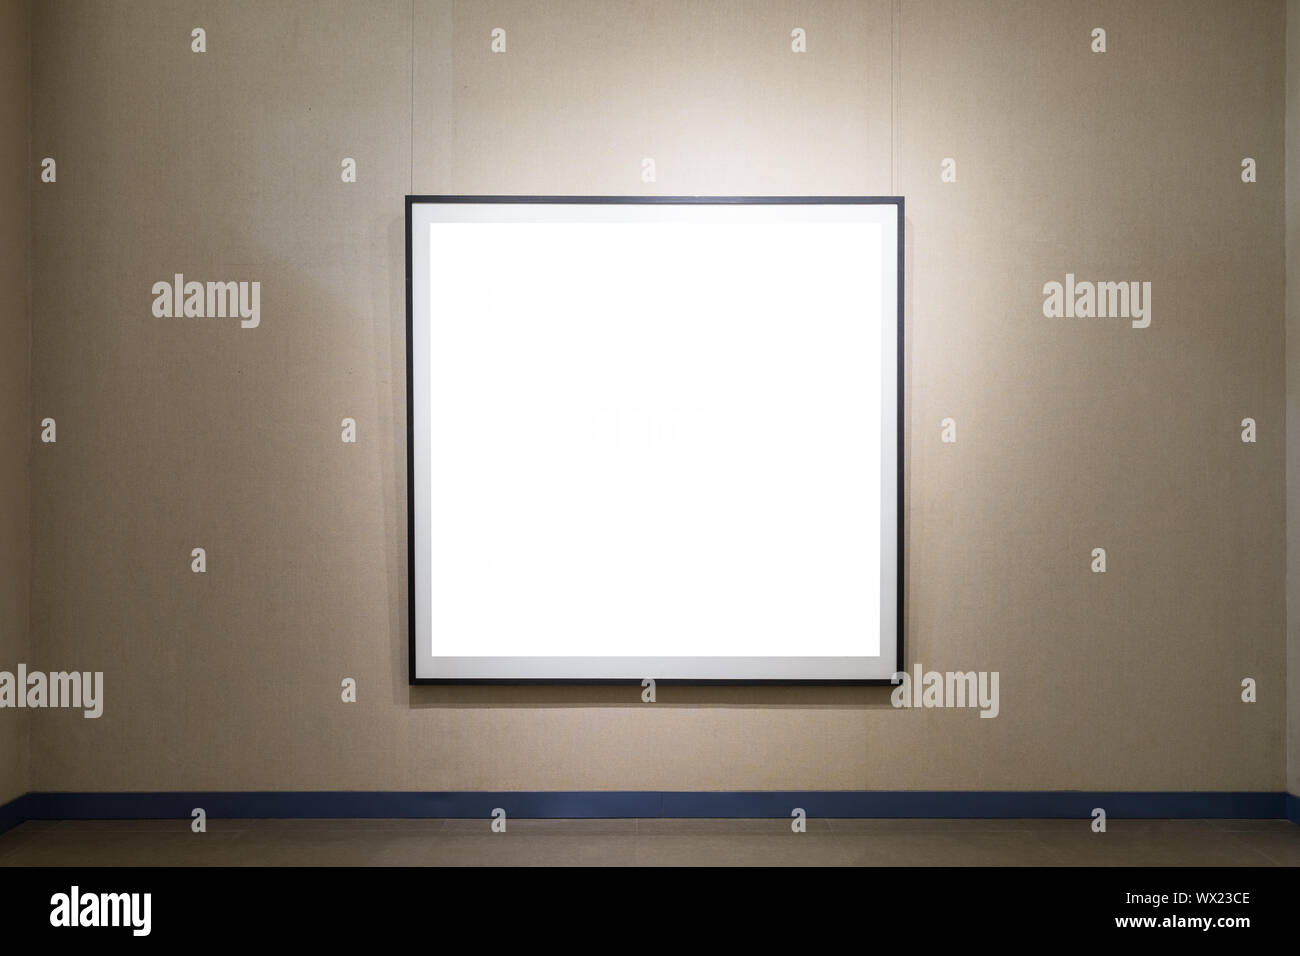 single blank frame on old wall Stock Photo